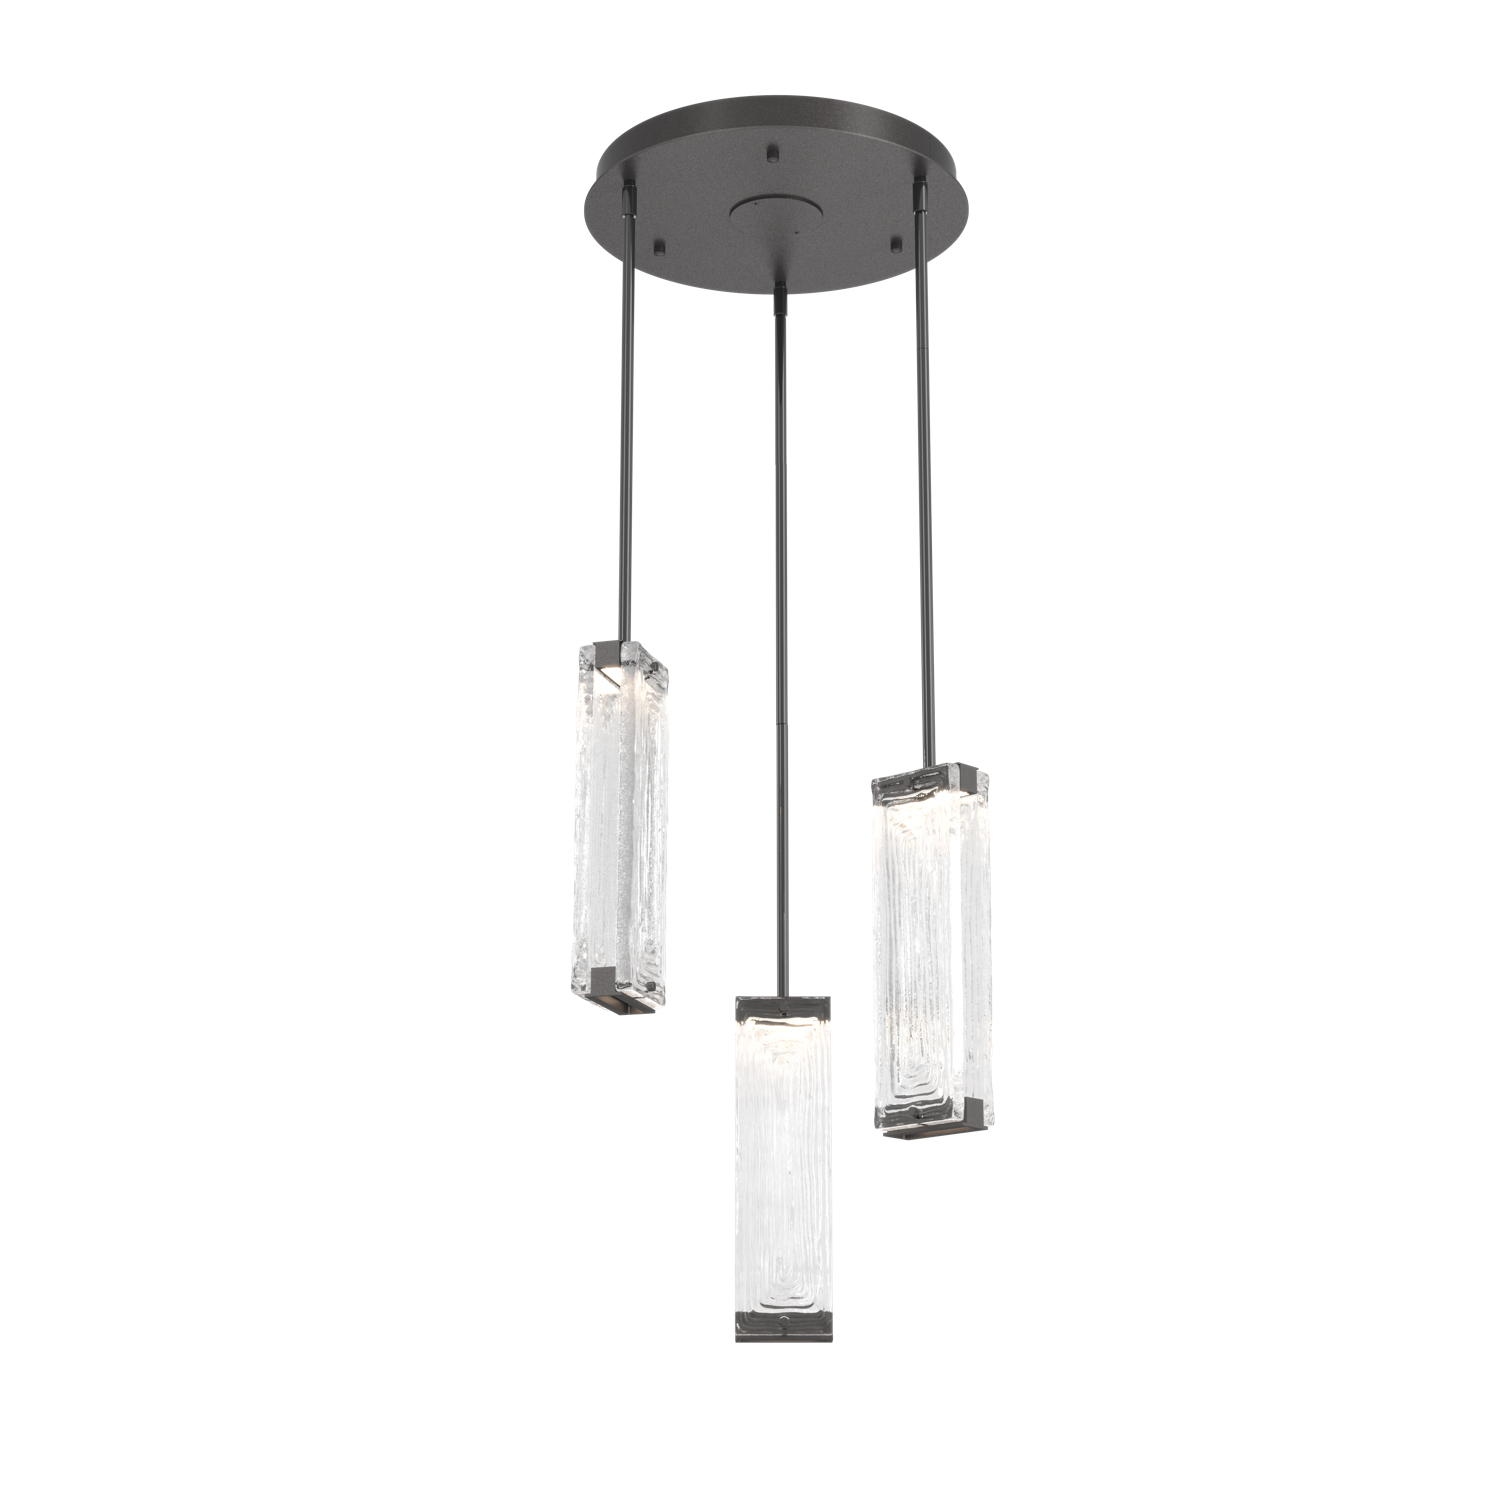 CHB0090-03-GP-TL-Hammerton-Studio-Tabulo-3-light-multi-pendant-chandelier-with-graphite-finish-and-clear-linea-cast-glass-shade-and-LED-lamping